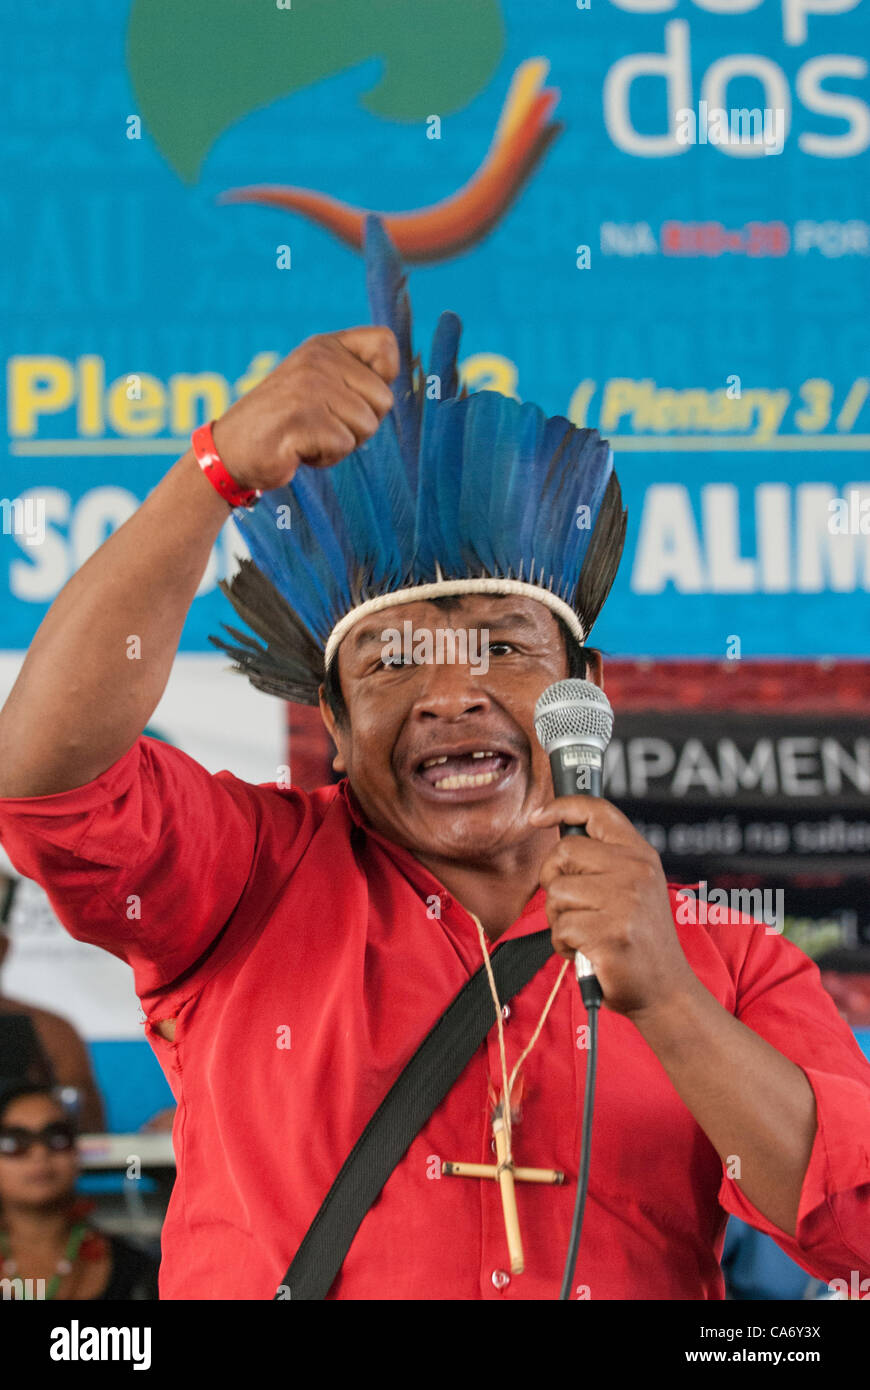 A Guarani leader from Mato Grosso do Sul speaks angrily at the indigenous forum about the plight of his people who have been badly affected by developments financed by BNDES, the Brazilian Development Bank. The People's Summit at the United Nations Conference on Sustainable Development (Rio+20), Rio de Janeiro, Brazil, 18th June 2012. Photo © Sue Cunningham. Stock Photo